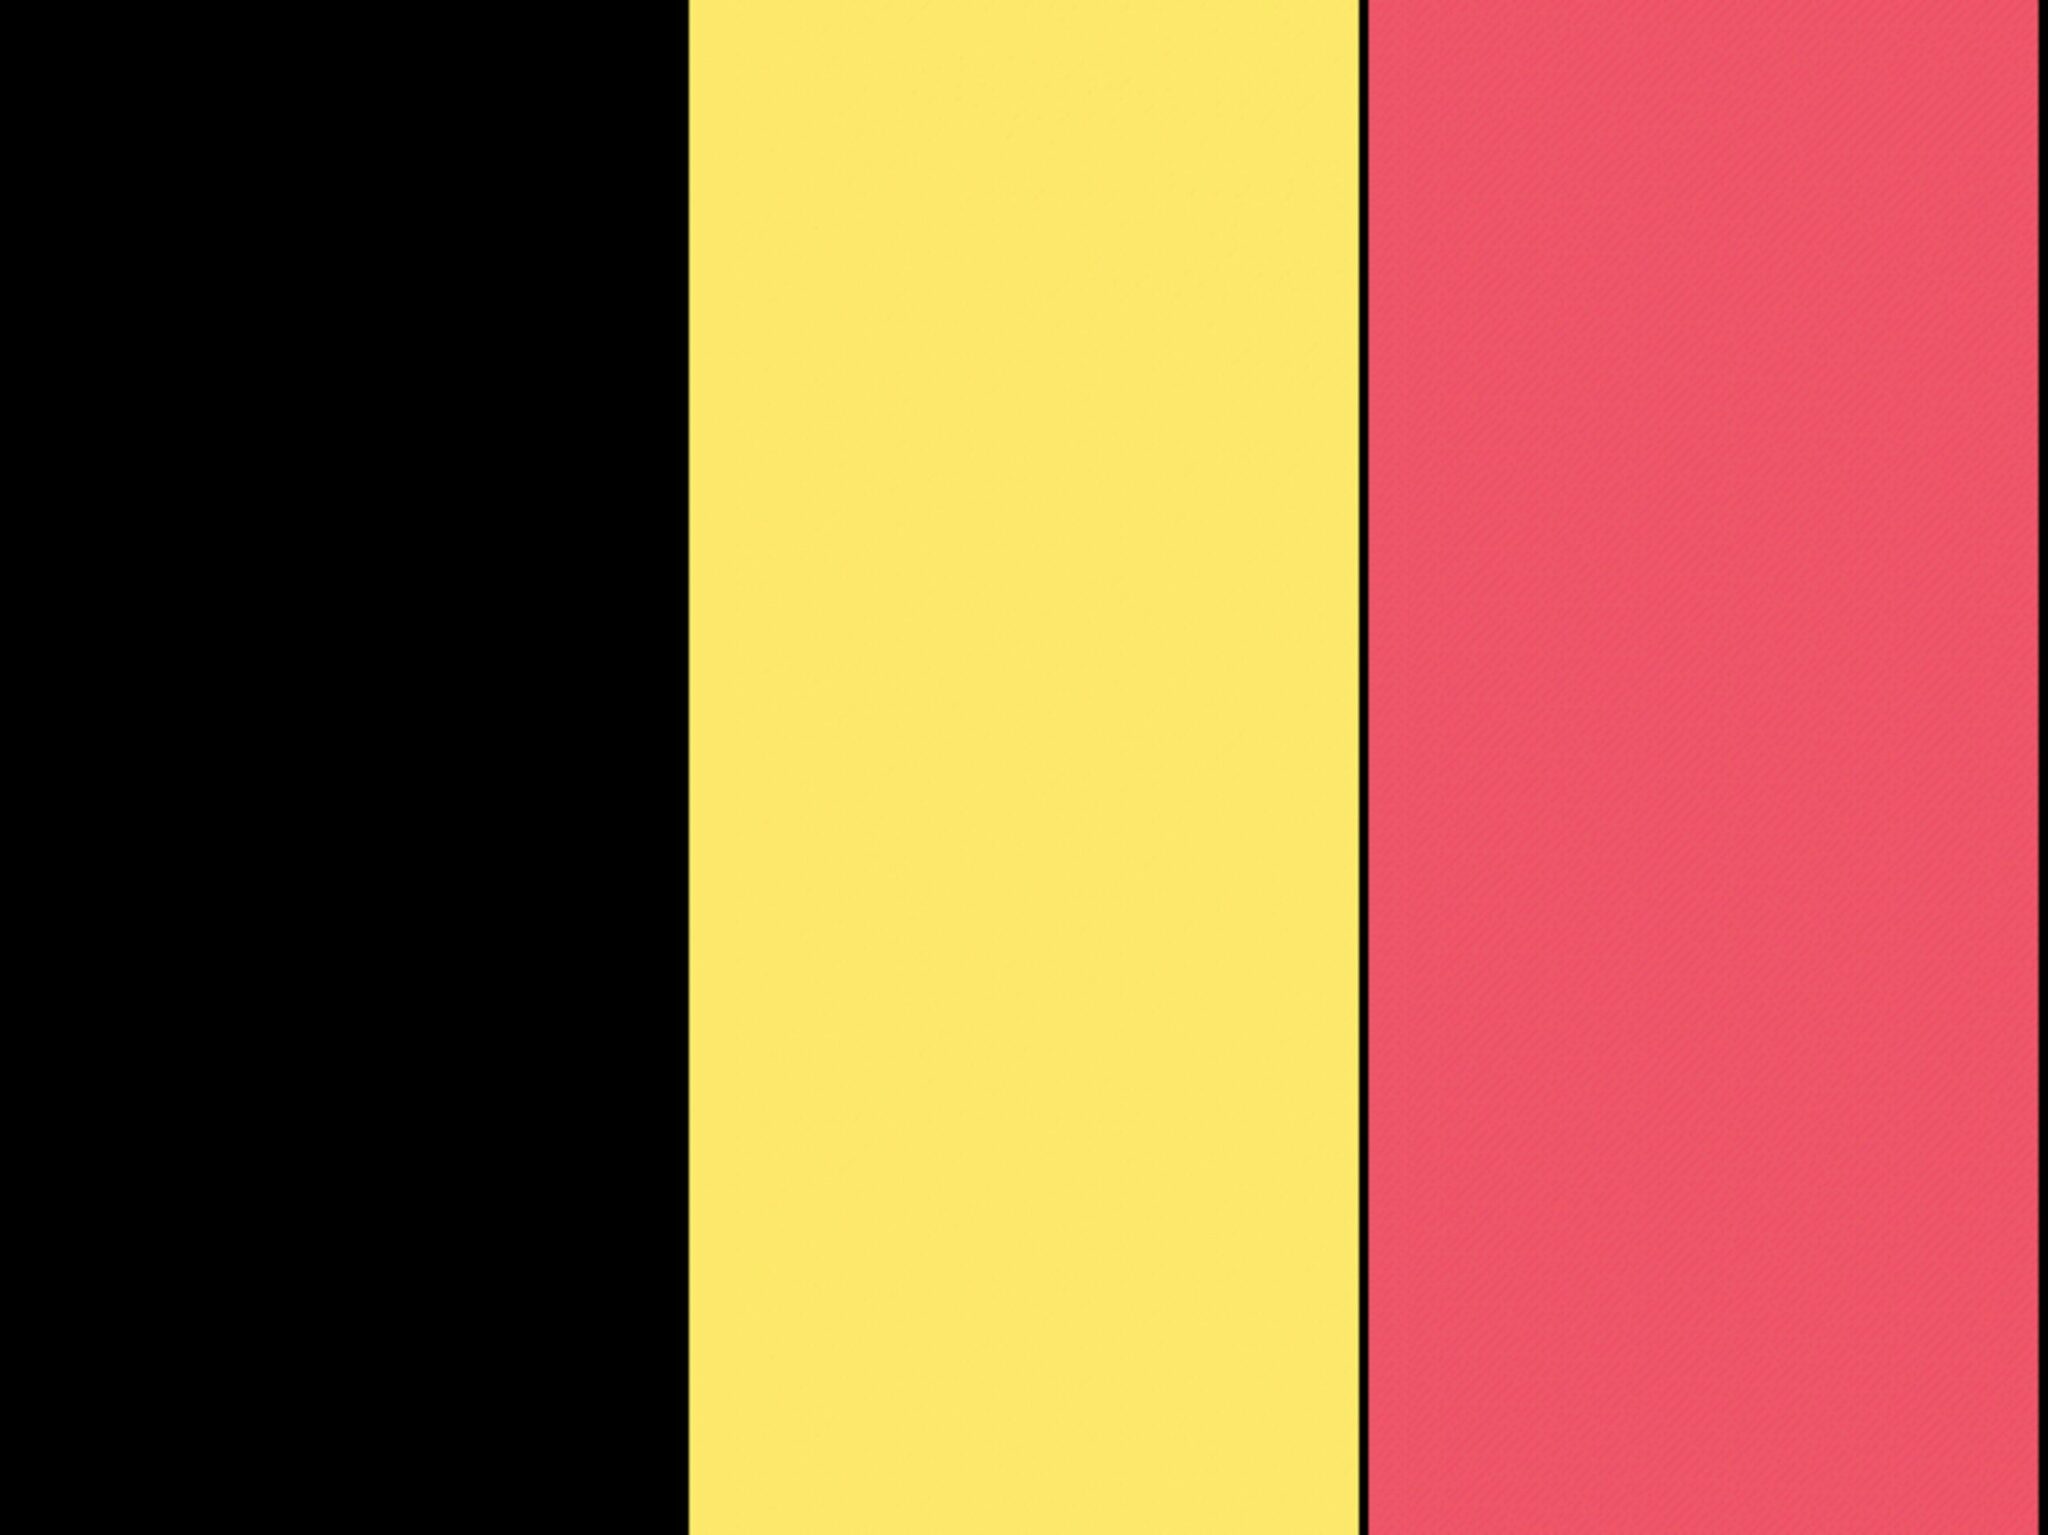 why is belgium called a divided country and what language do most people in belgium speak scaled